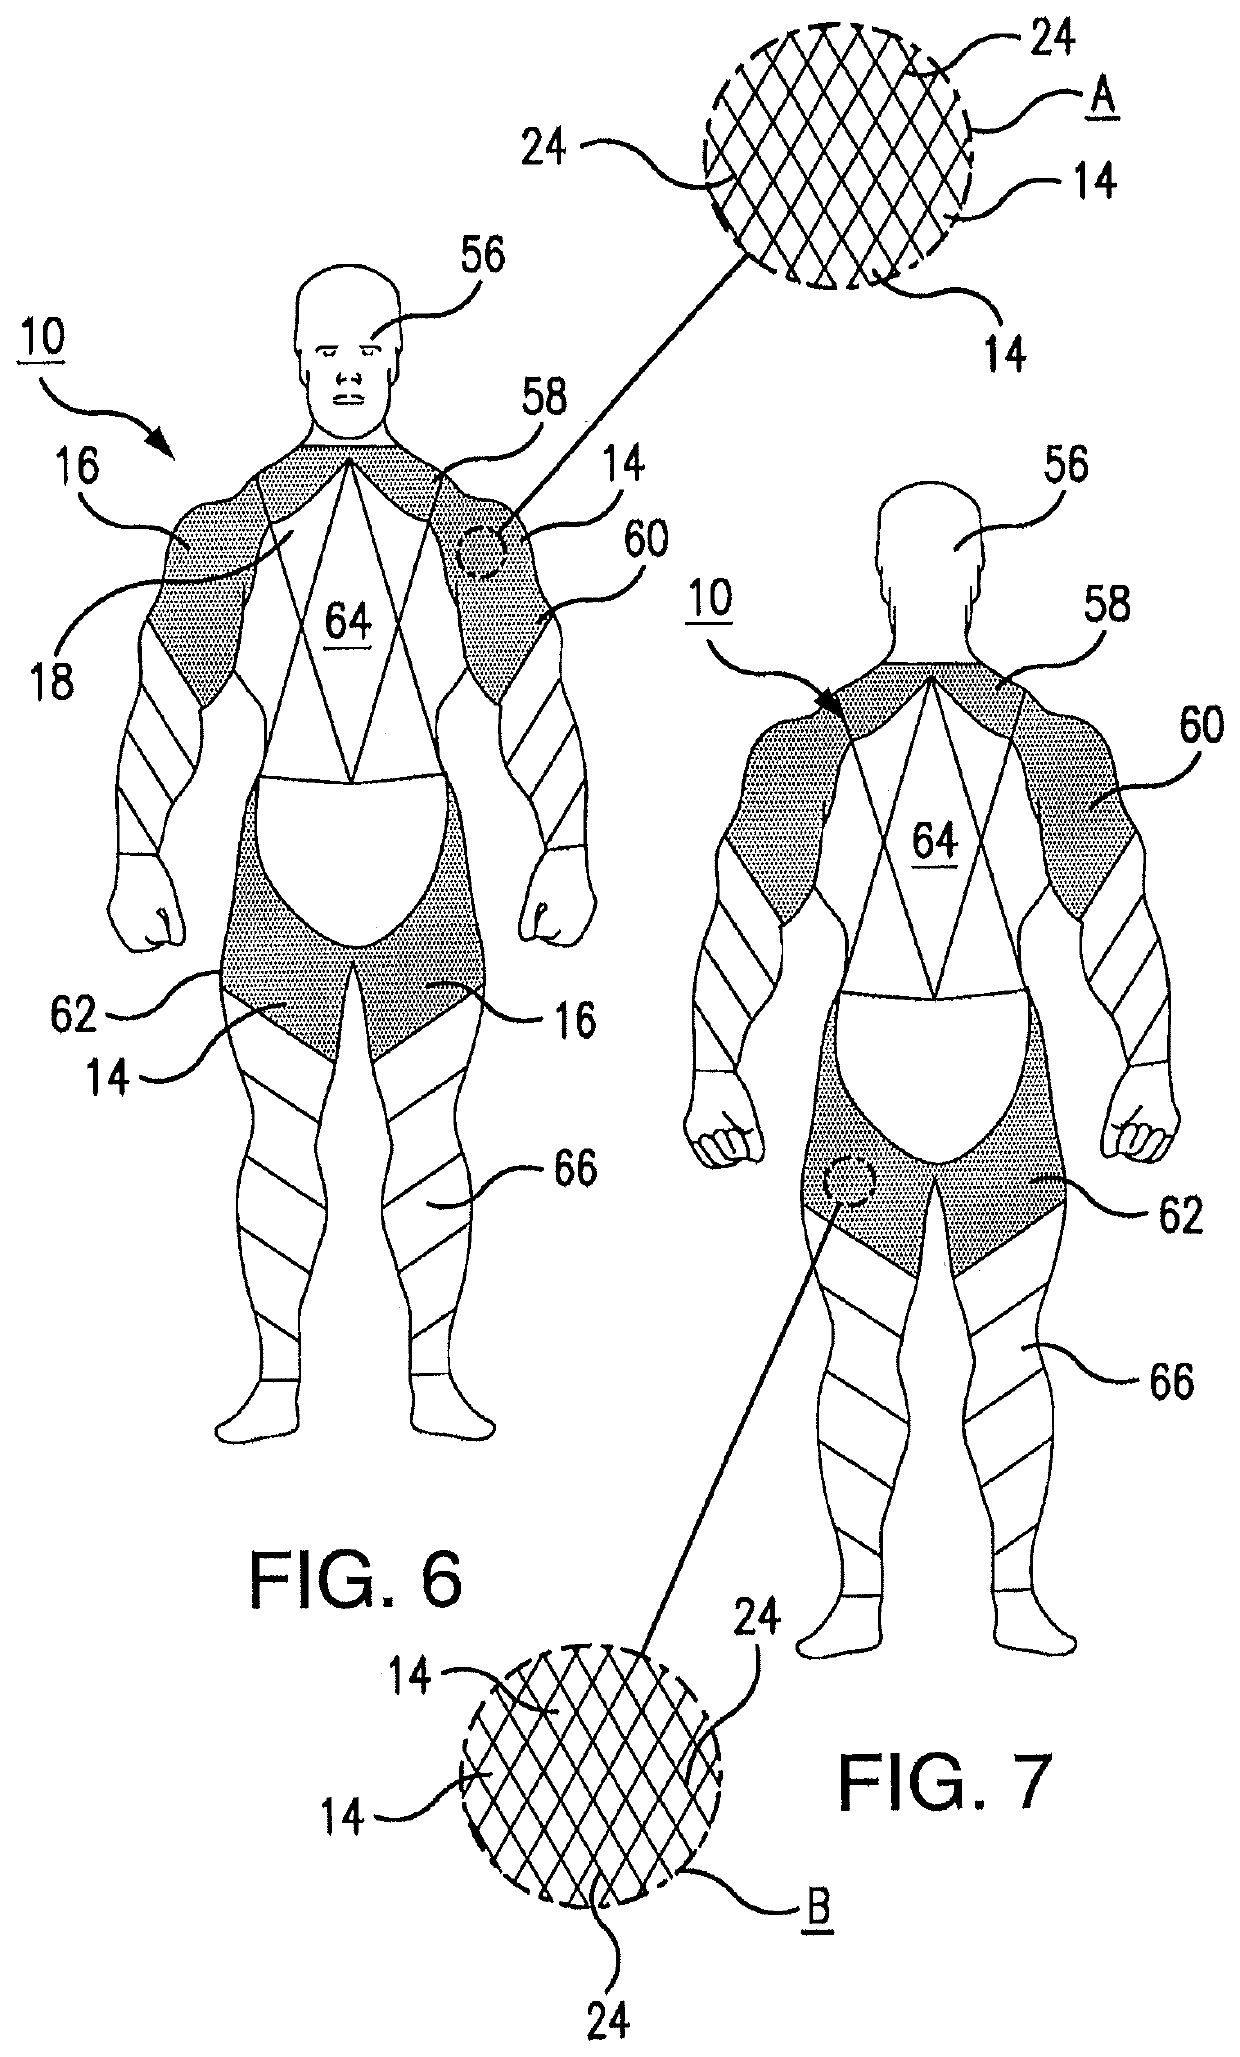 Integrated fabric system for apparel